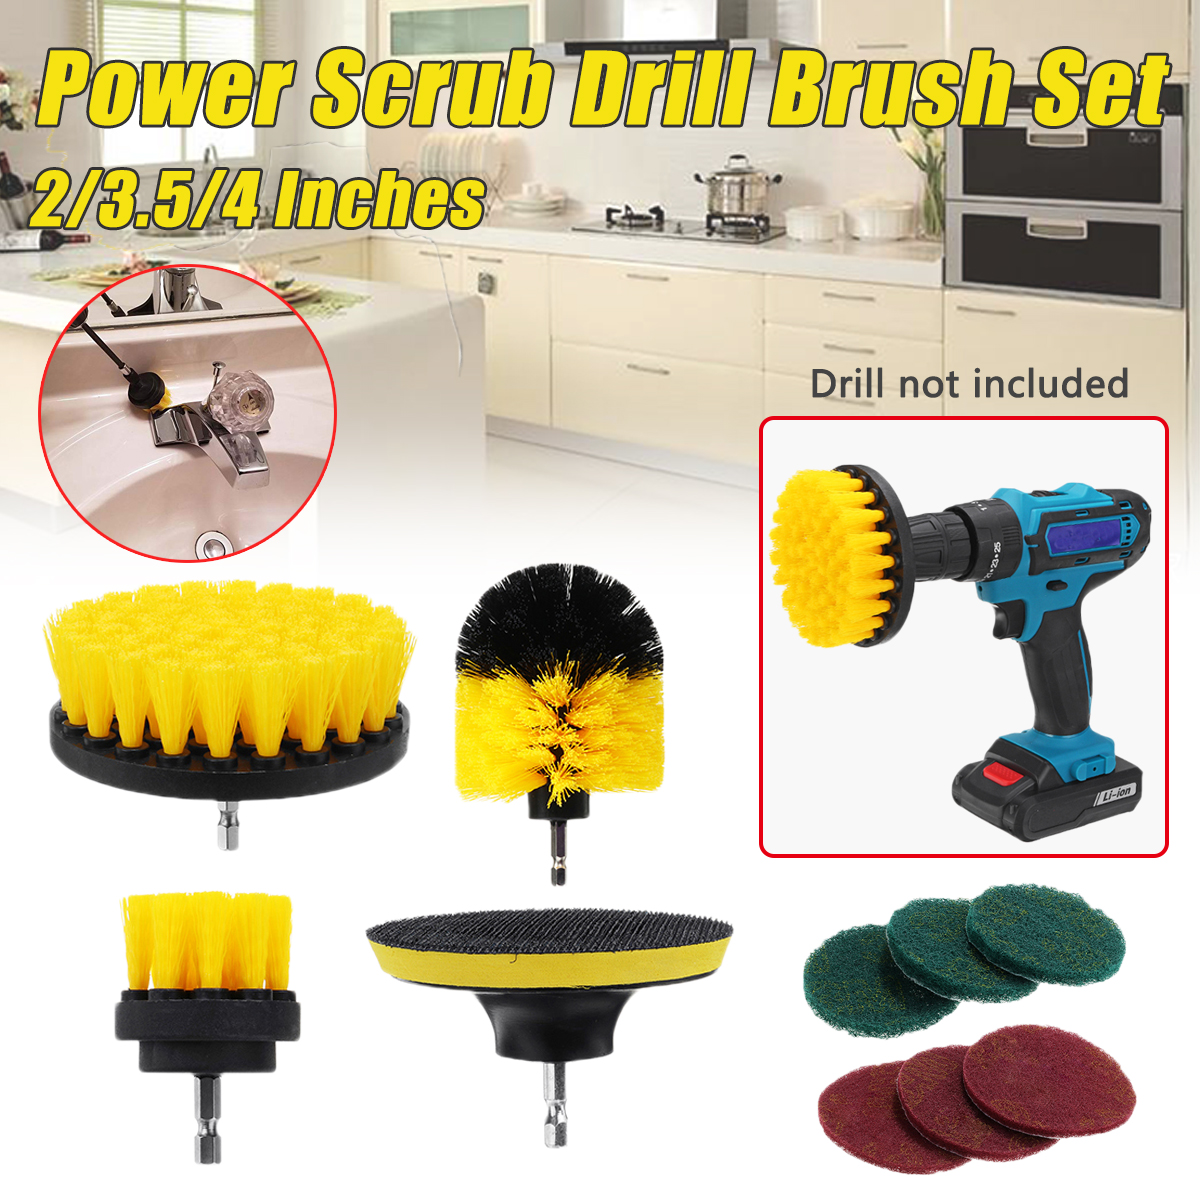 Power Scrubber Drill Brush Set Cleaner Spin Tub Shower Tile Grout Wall 5 Brushes 